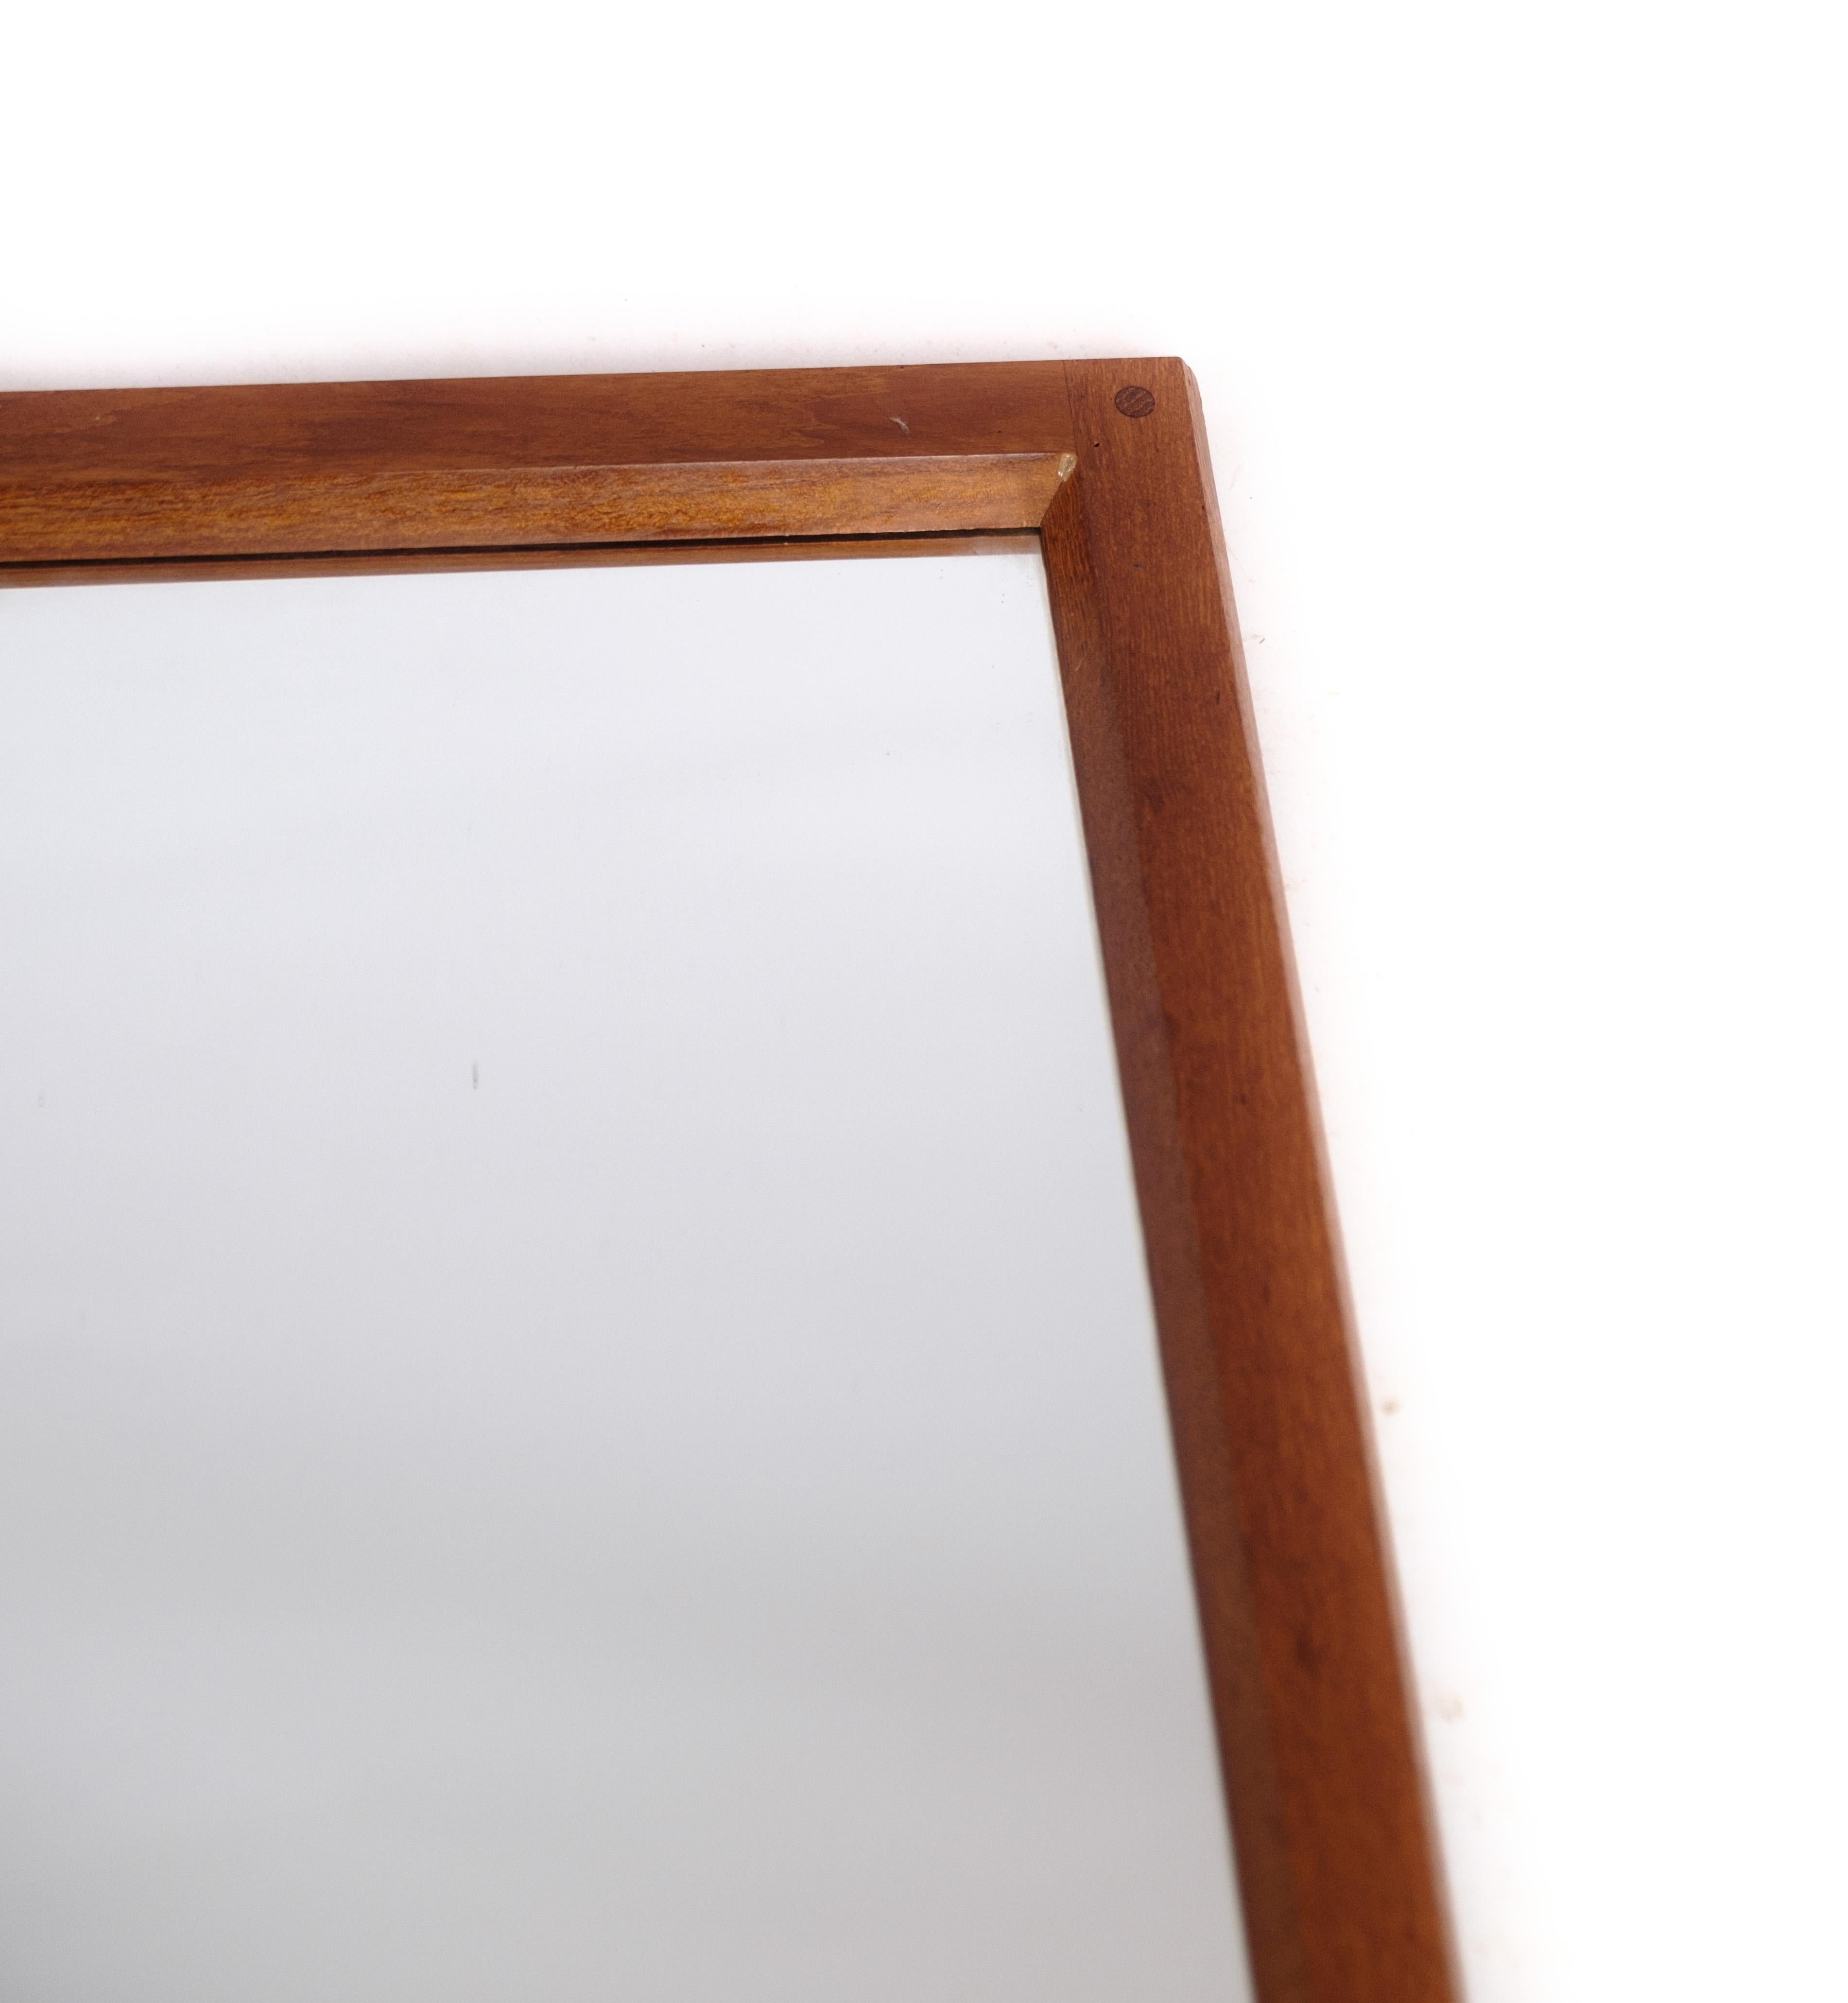 This mirror is a beautiful example of Danish modern design, featuring a frame made of teak wood. The design is attributed to Aksel Kjersgaard, a Danish furniture designer known for his functional and elegant pieces. The mirror dates back to the